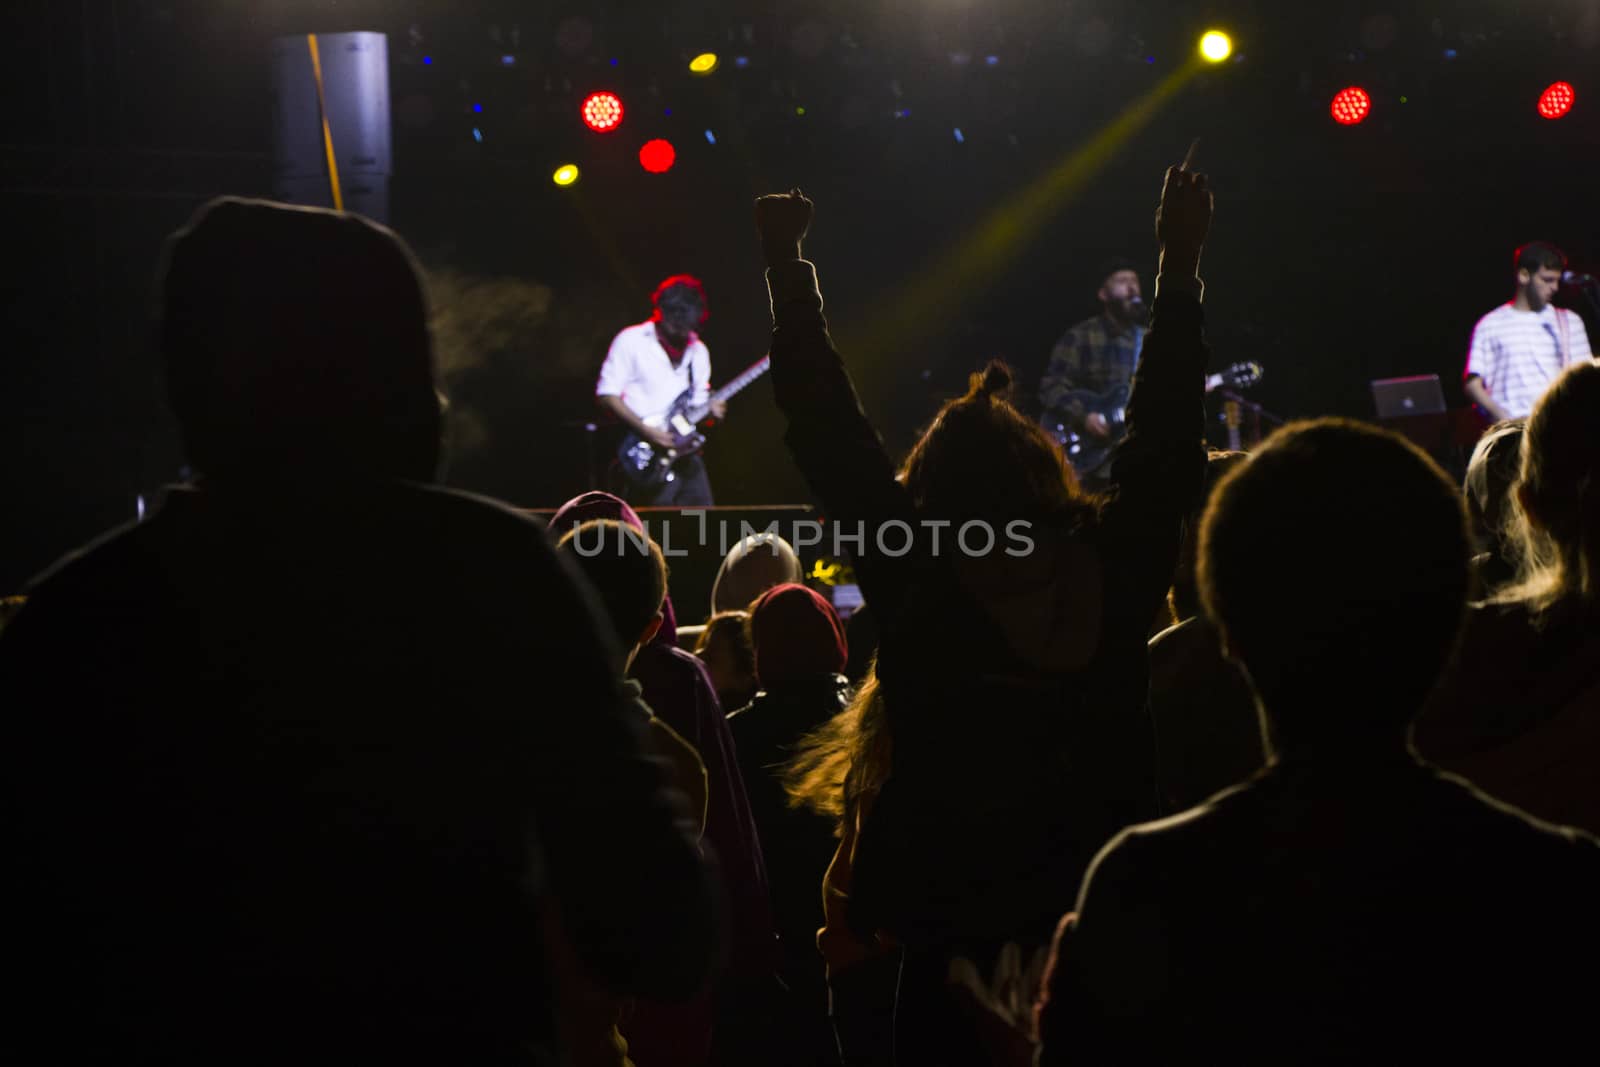 Live music concert, night life and crowd people, standing and listening music young adult people. Dark and lights.